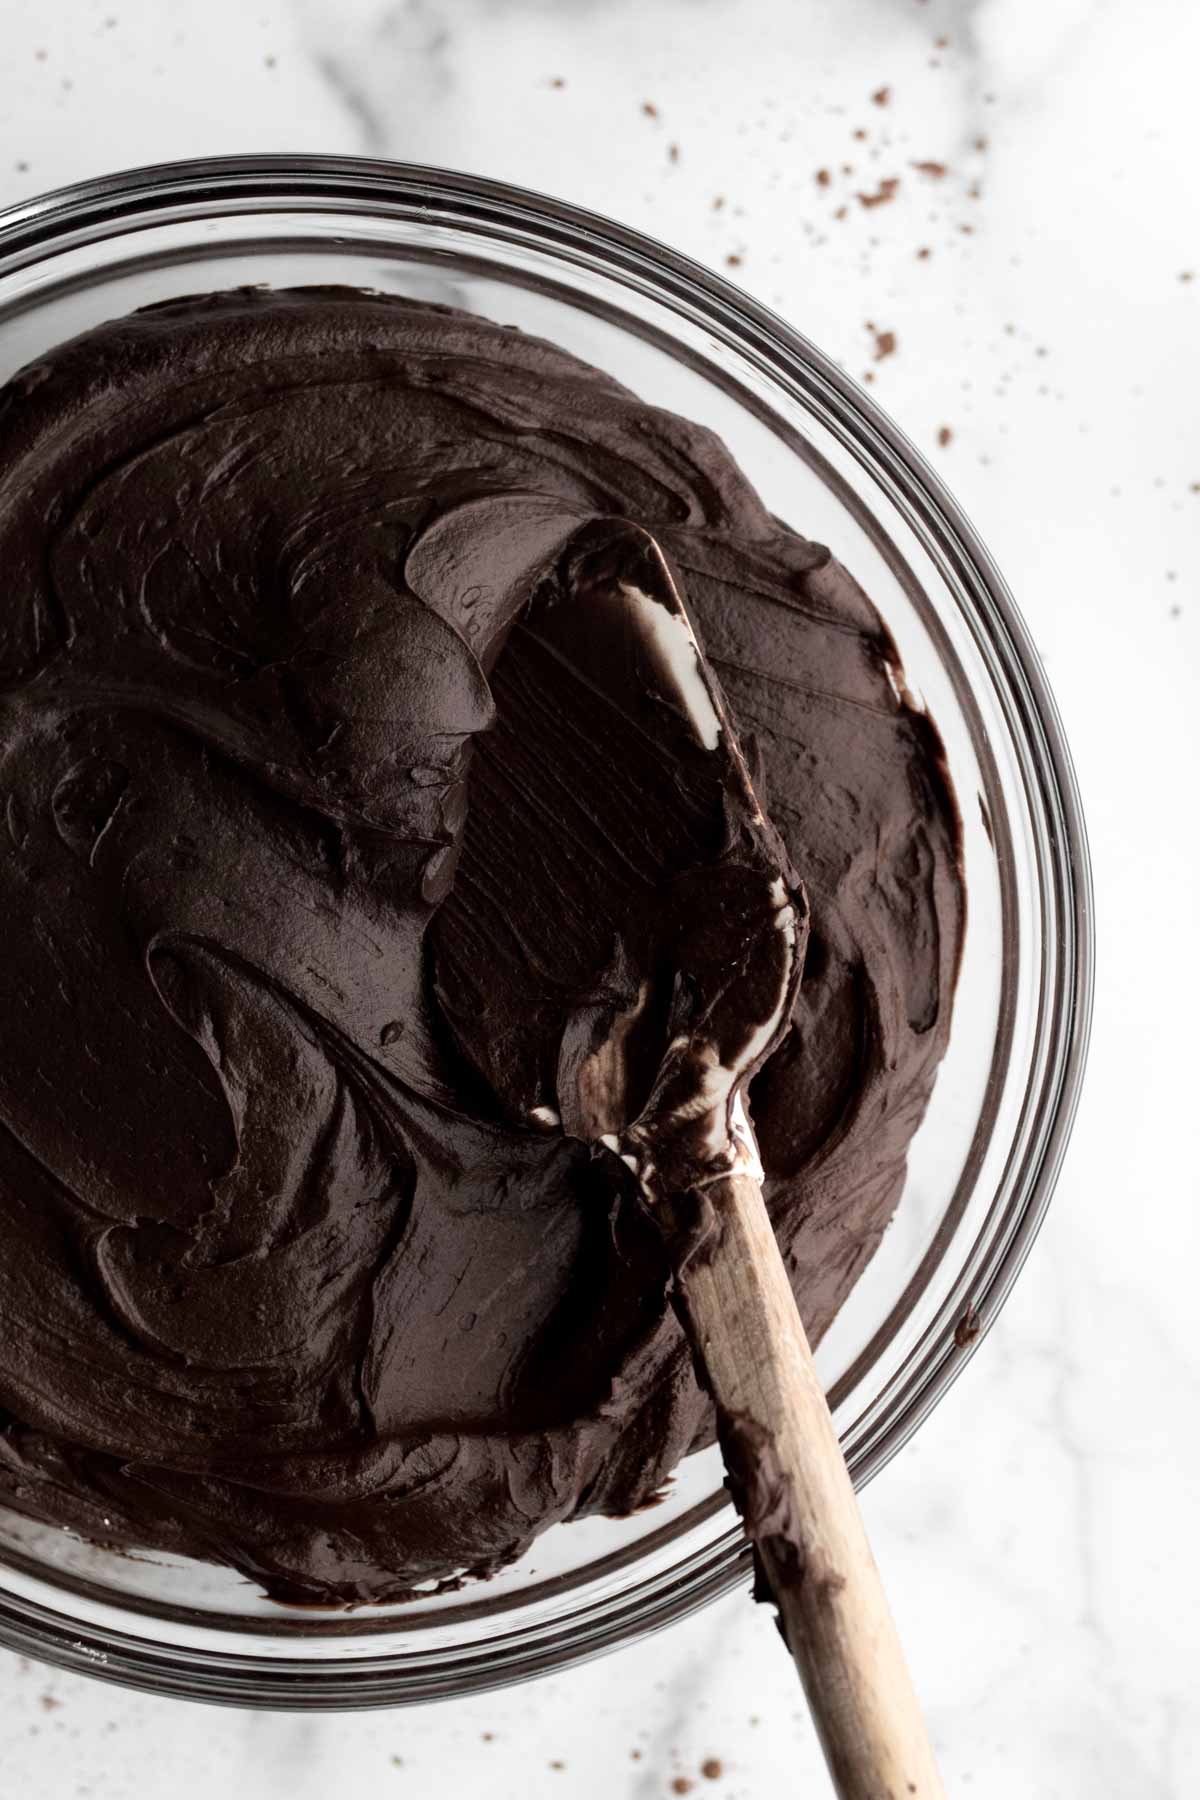 Creamy chocolate frosting in a bowl.